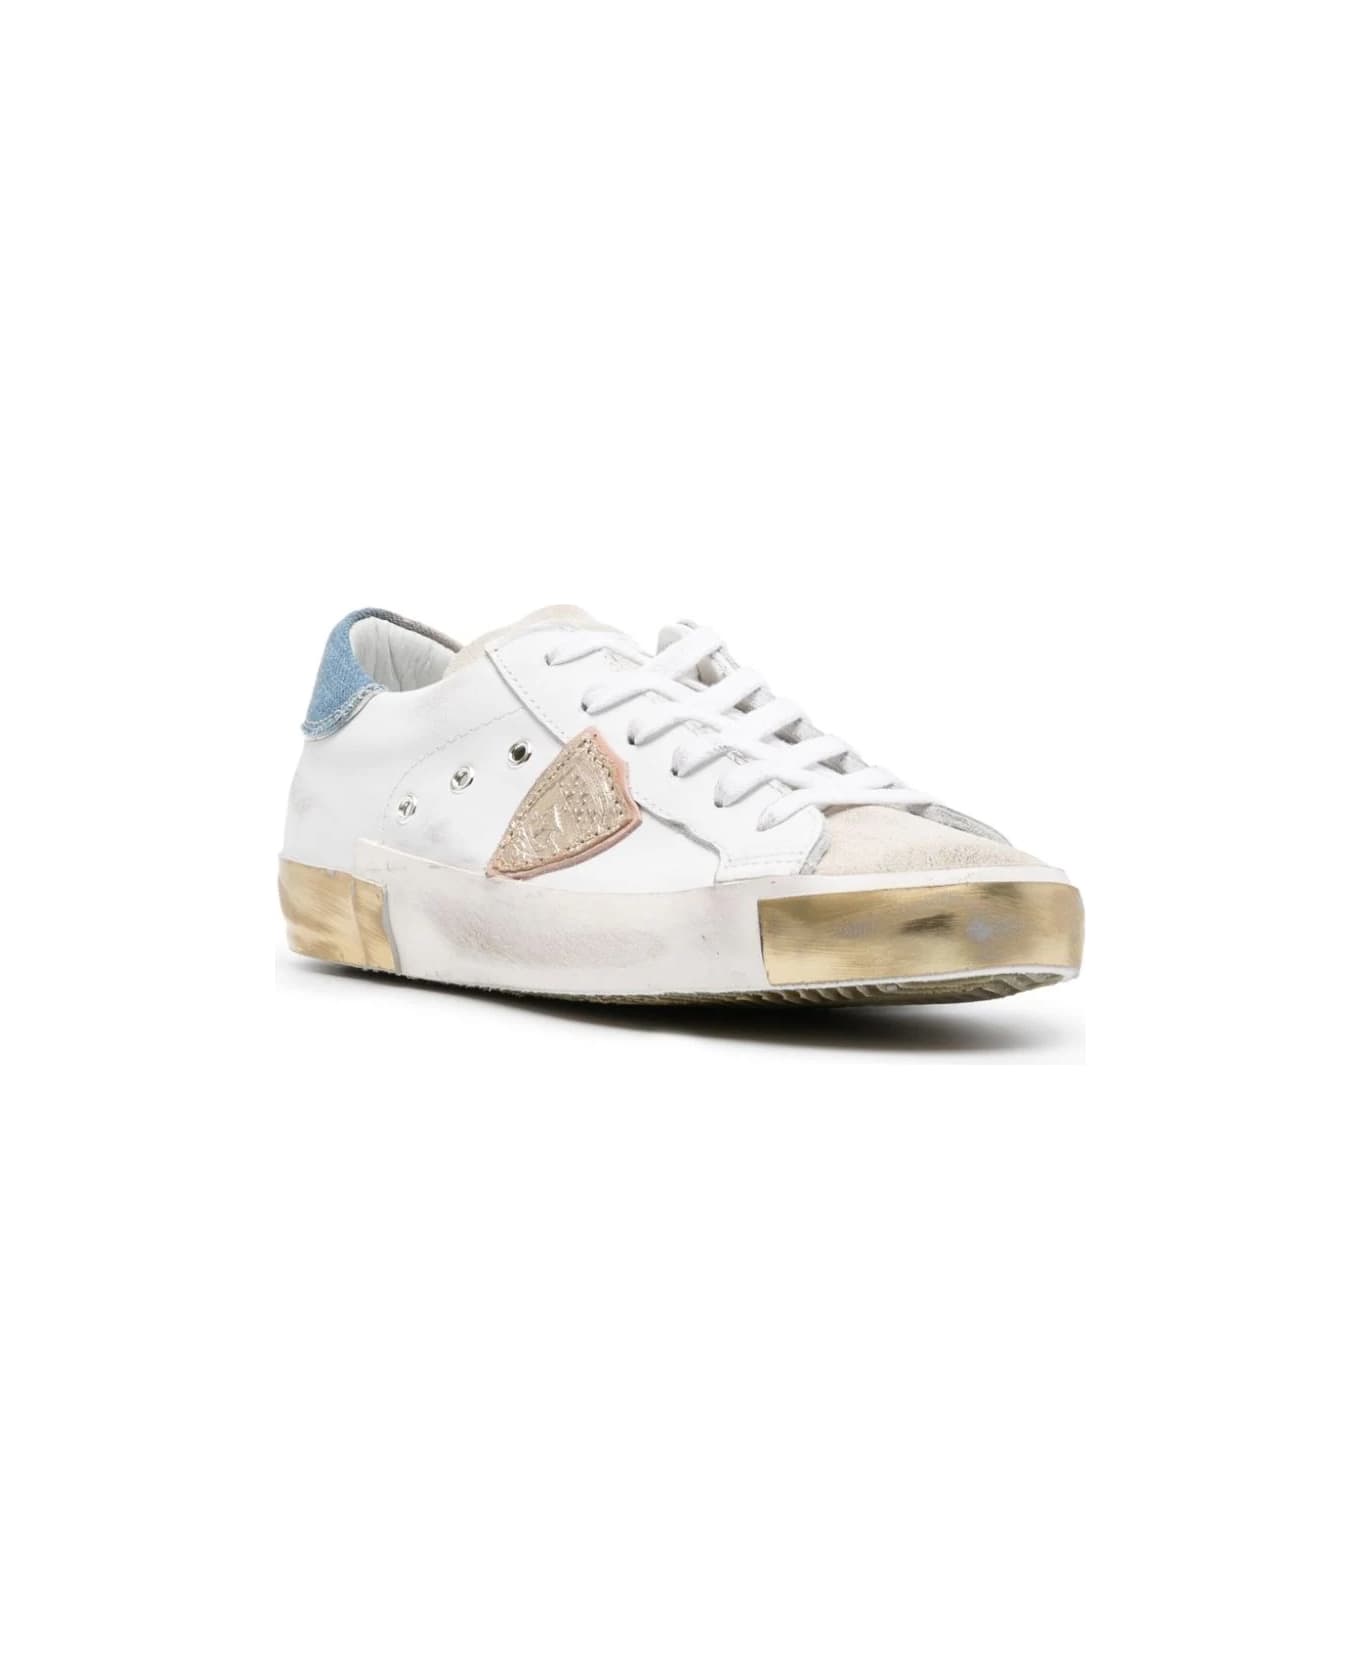 Philippe Model Prsx Low Sneakers - White And Light Blue - White スニーカー